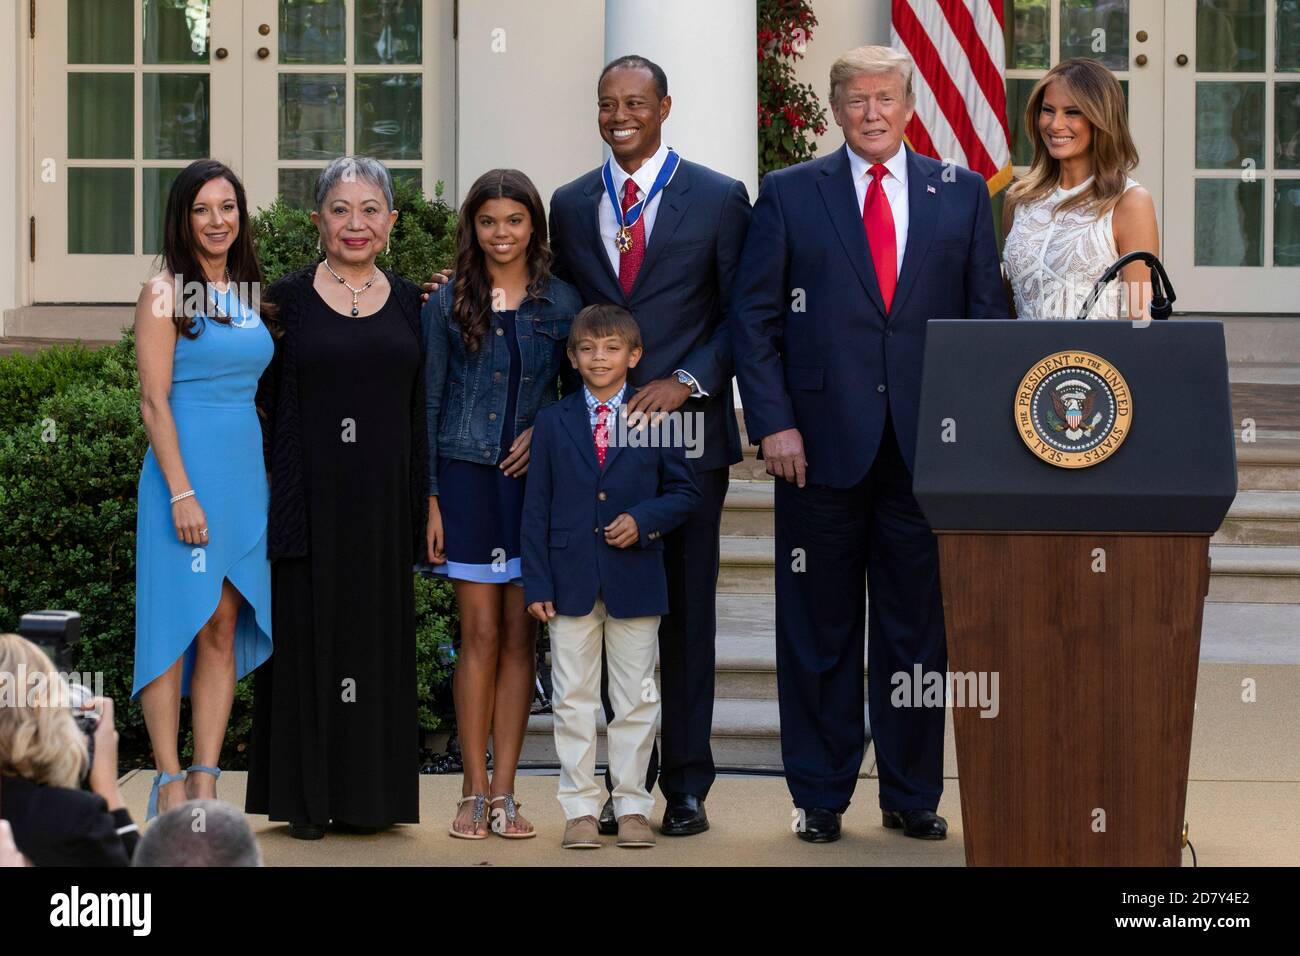 U.S. President Donald Trump and First Lady Melania Trump pose for a photo with golfer Tiger Woods and his family after Trump awarded Woods the Presidential Medal of Freedom to Woods in the Rose Garden of the White House in Washington, D.C. on Monday, May 6, 2019. The Presidential Medal of Freedom is the highest honor a U.S. President can bestow on a civilian. Woods is the fourth golfer to receive the award. Credit: Alex Edelman/The Photo Access Stock Photo